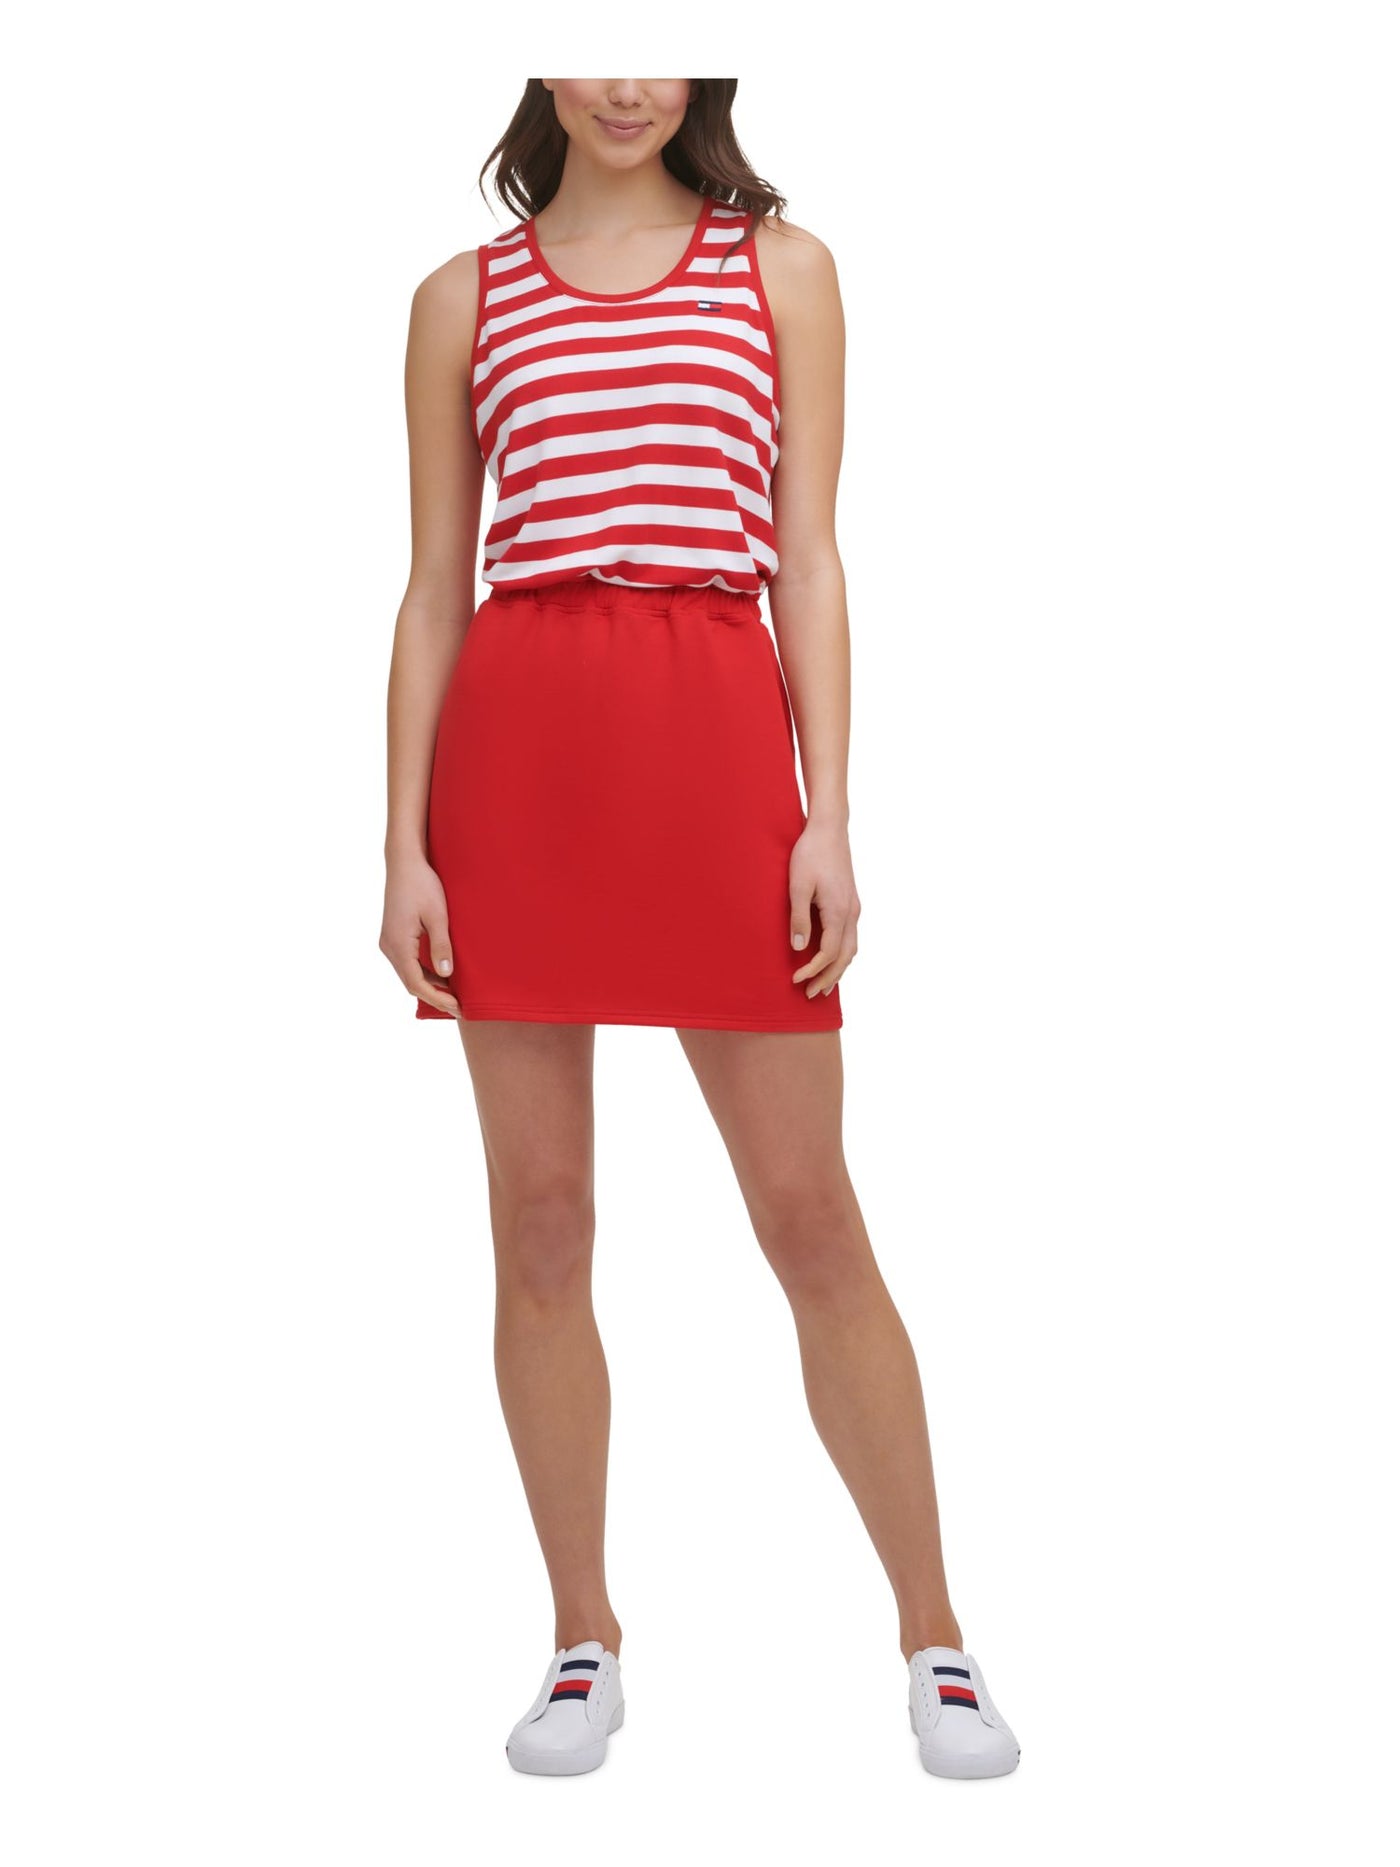 TOMMY HILFIGER SPORT Womens Red Stretch Embroidered Terry Cinched-waist Striped Sleeveless Scoop Neck Short Sheath Dress XL